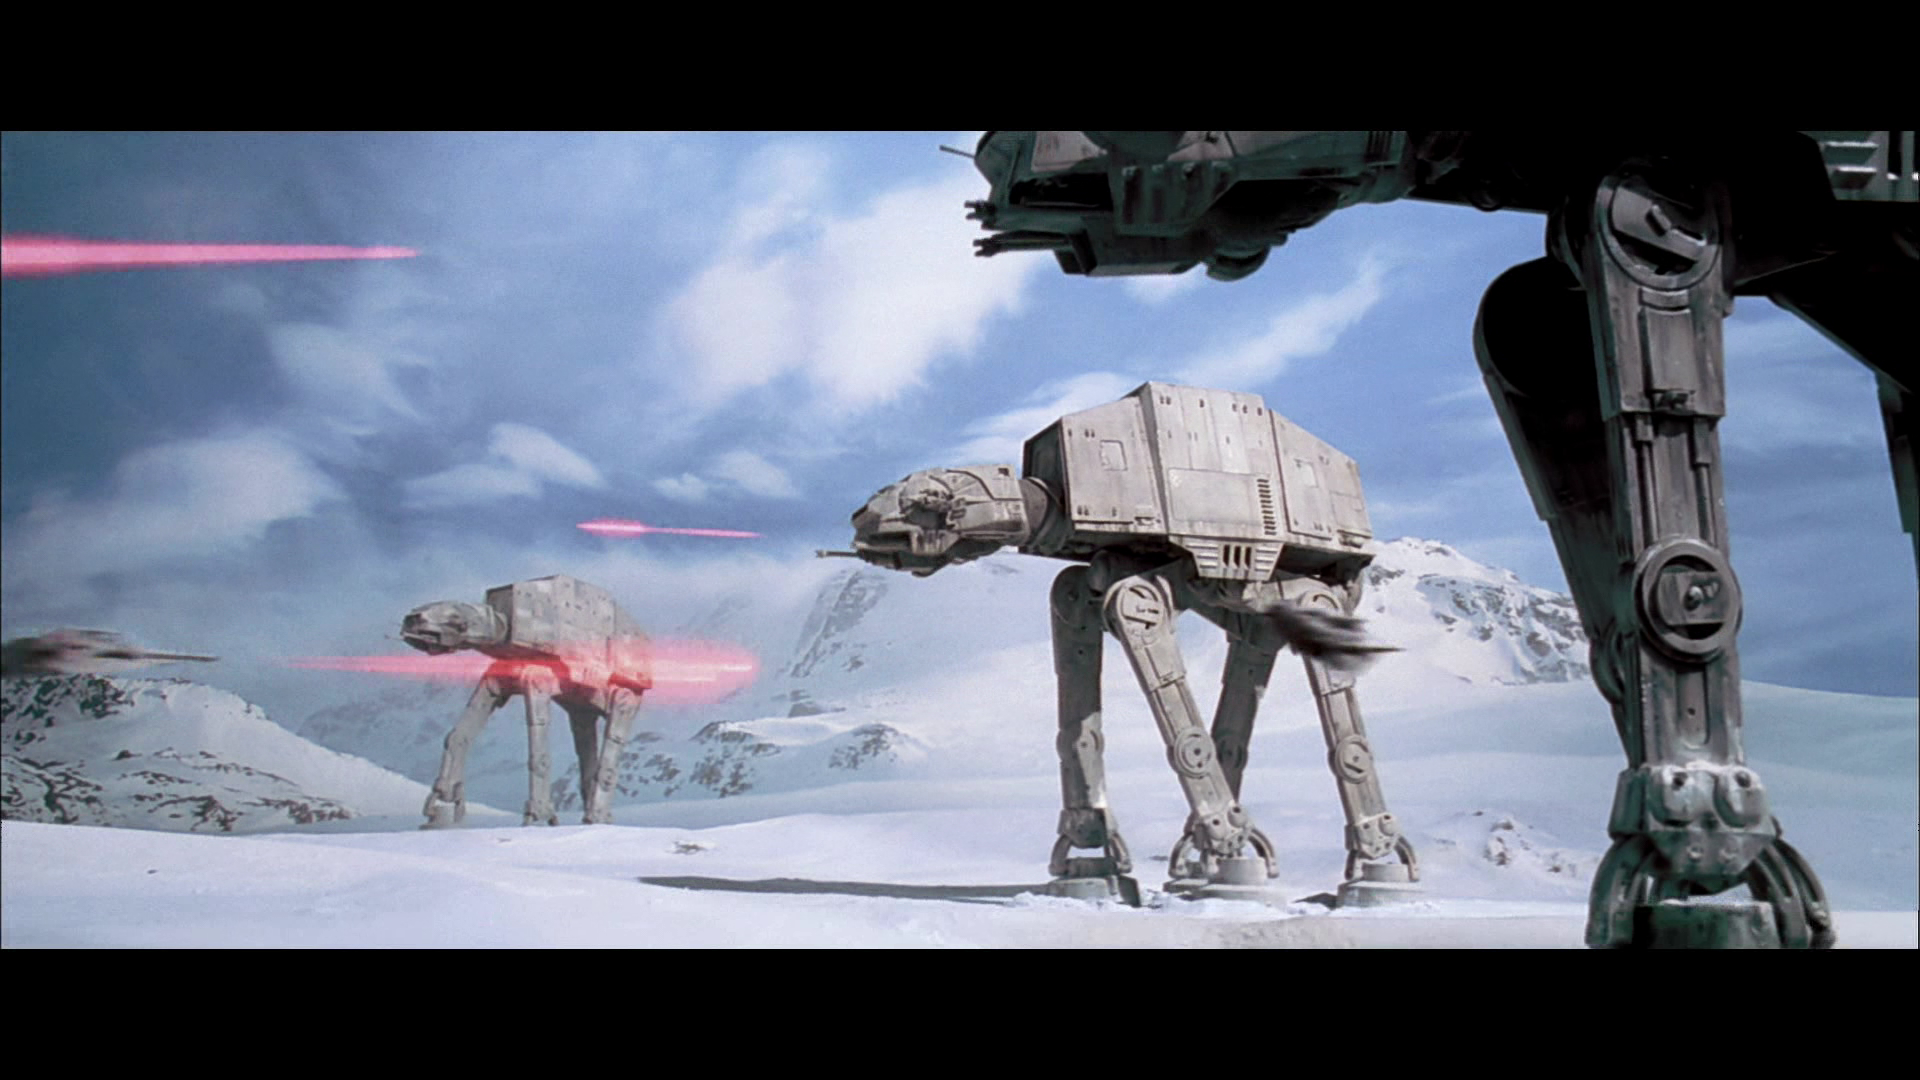 Star Wars Episode V: The Empire Strikes Back Wallpapers, Pictures, Images